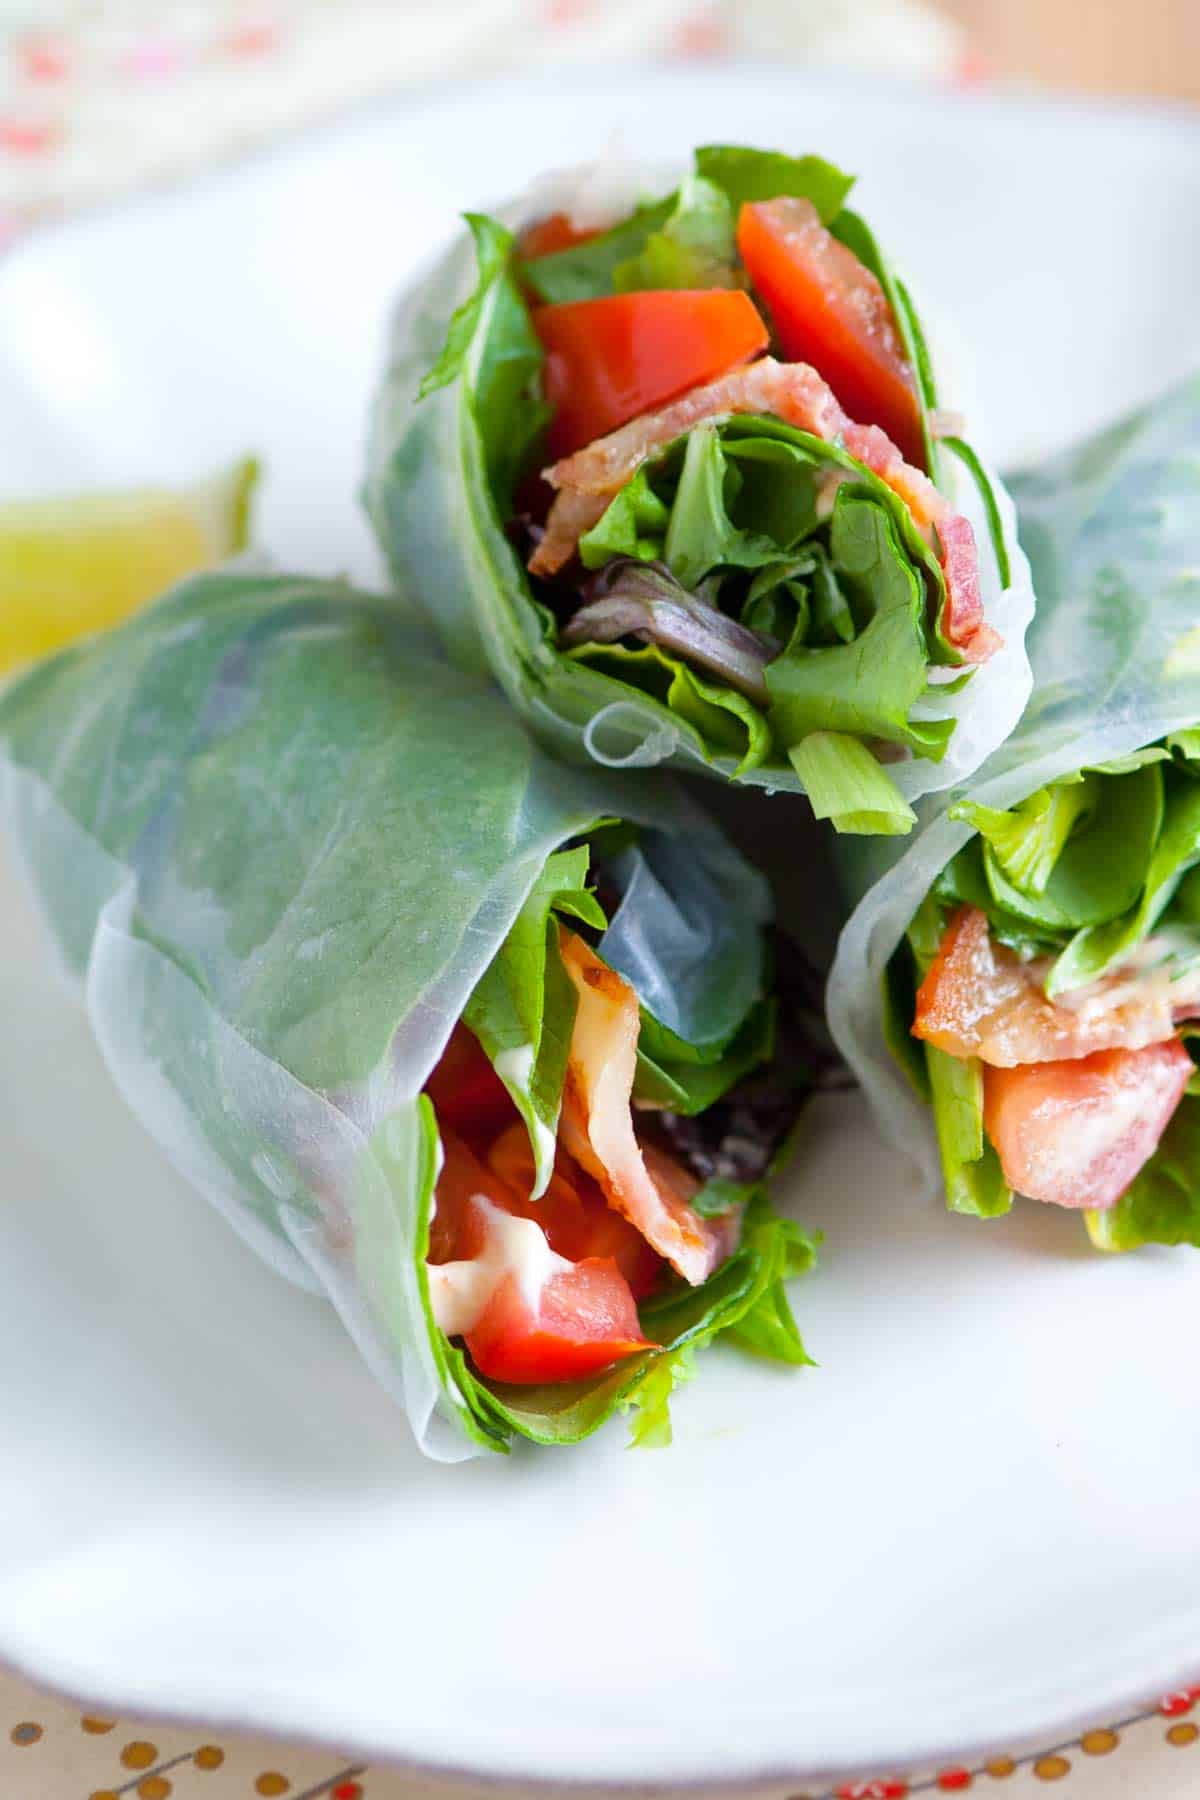 How to Wrap Spring Rolls - Working with Rice Paper Wrappers